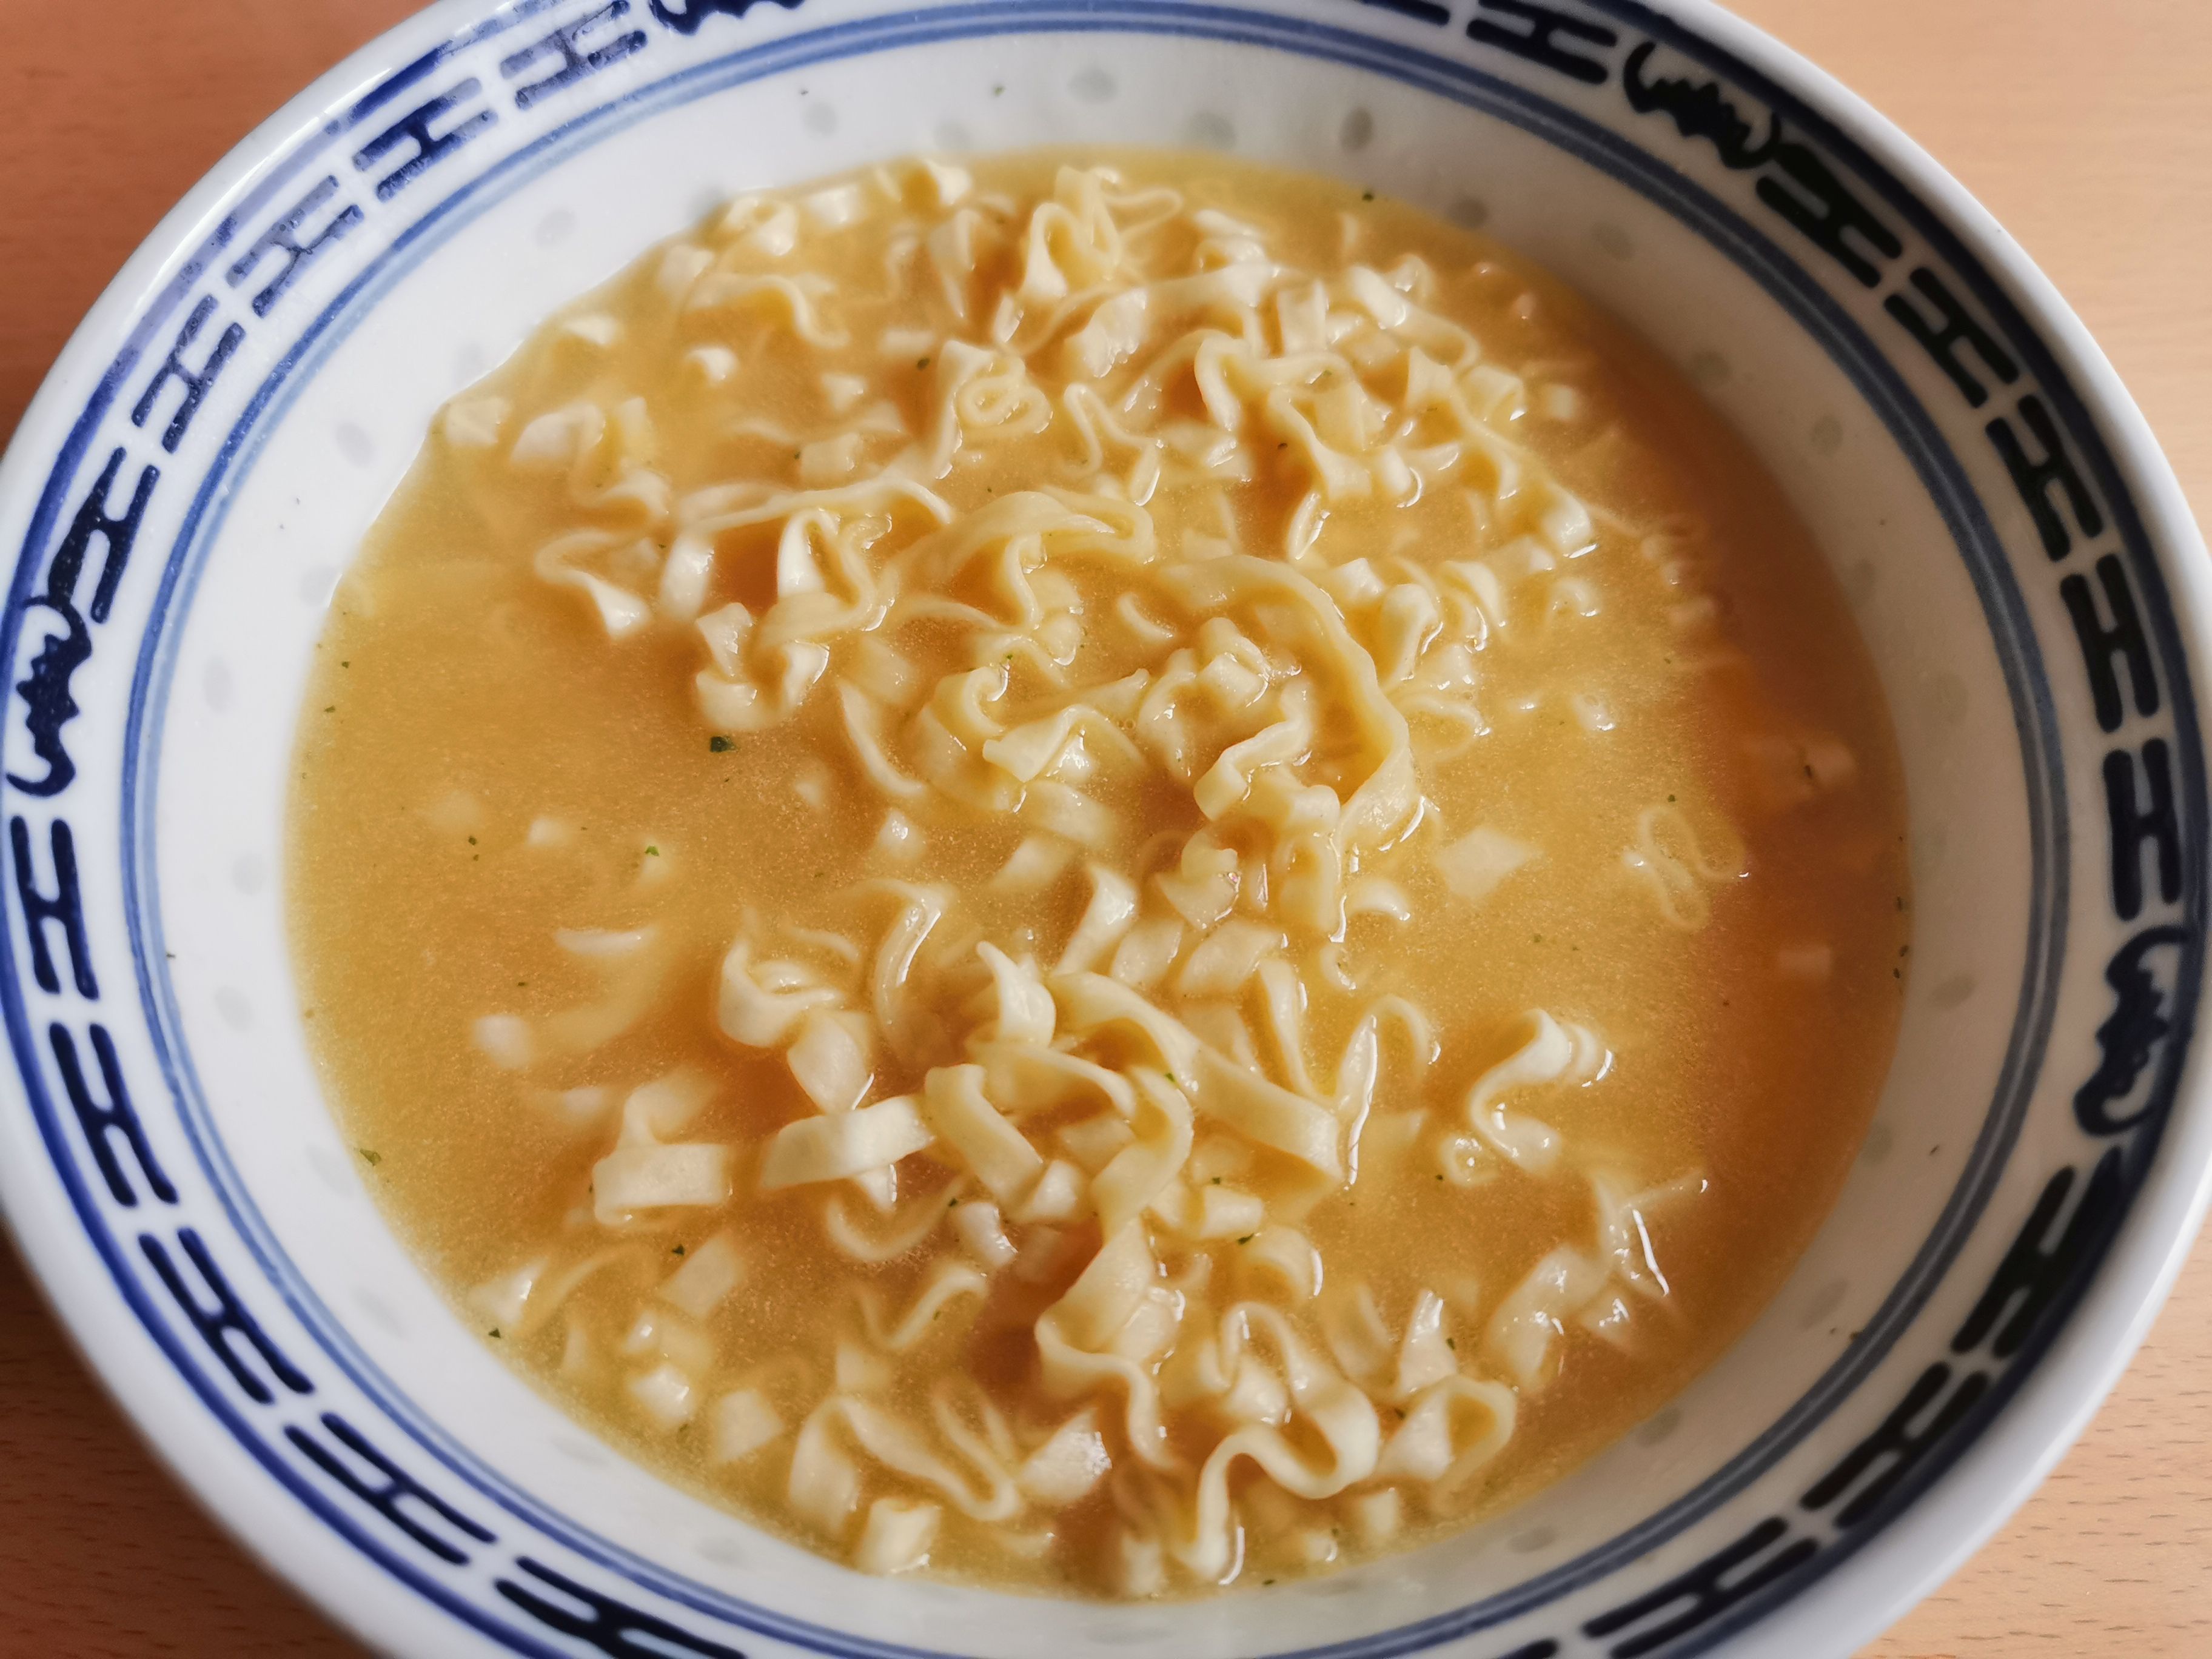 #2186: Maruchan "Instant Lunch Cheddar Cheese" Cup"